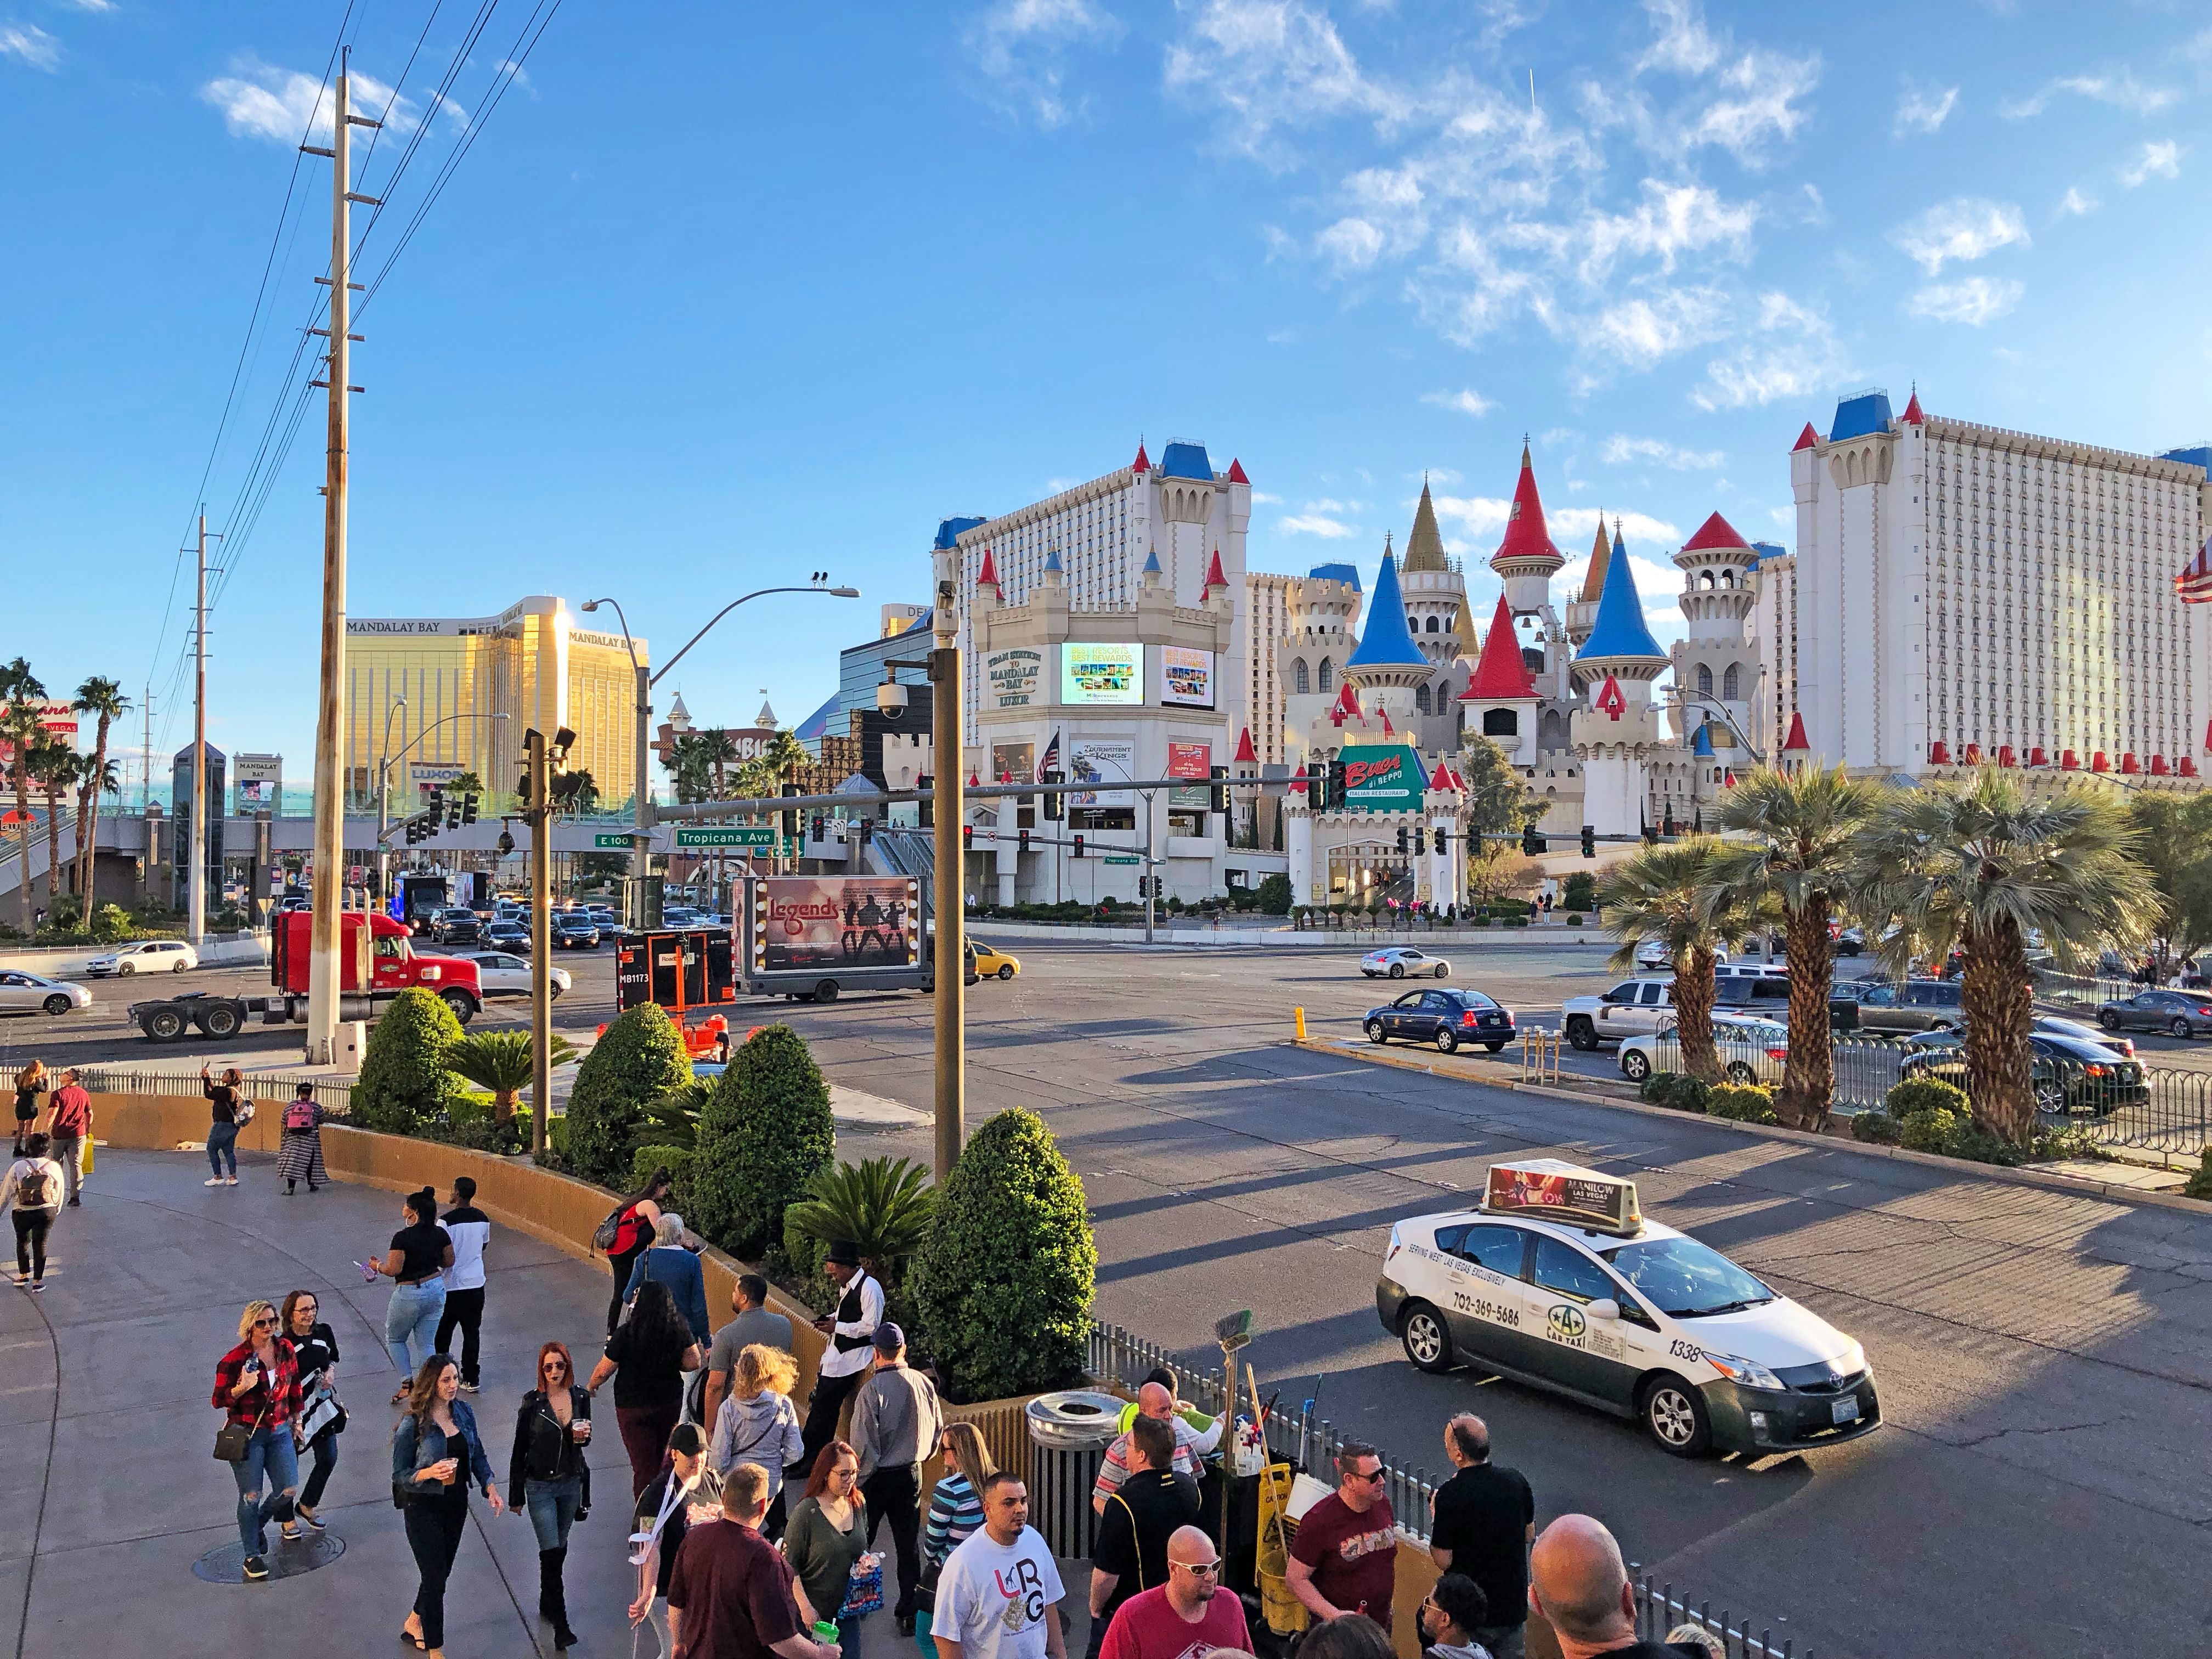 Panoramic view of the Excalibur Hotel and Casino Castle and towers with people walking on pavement.